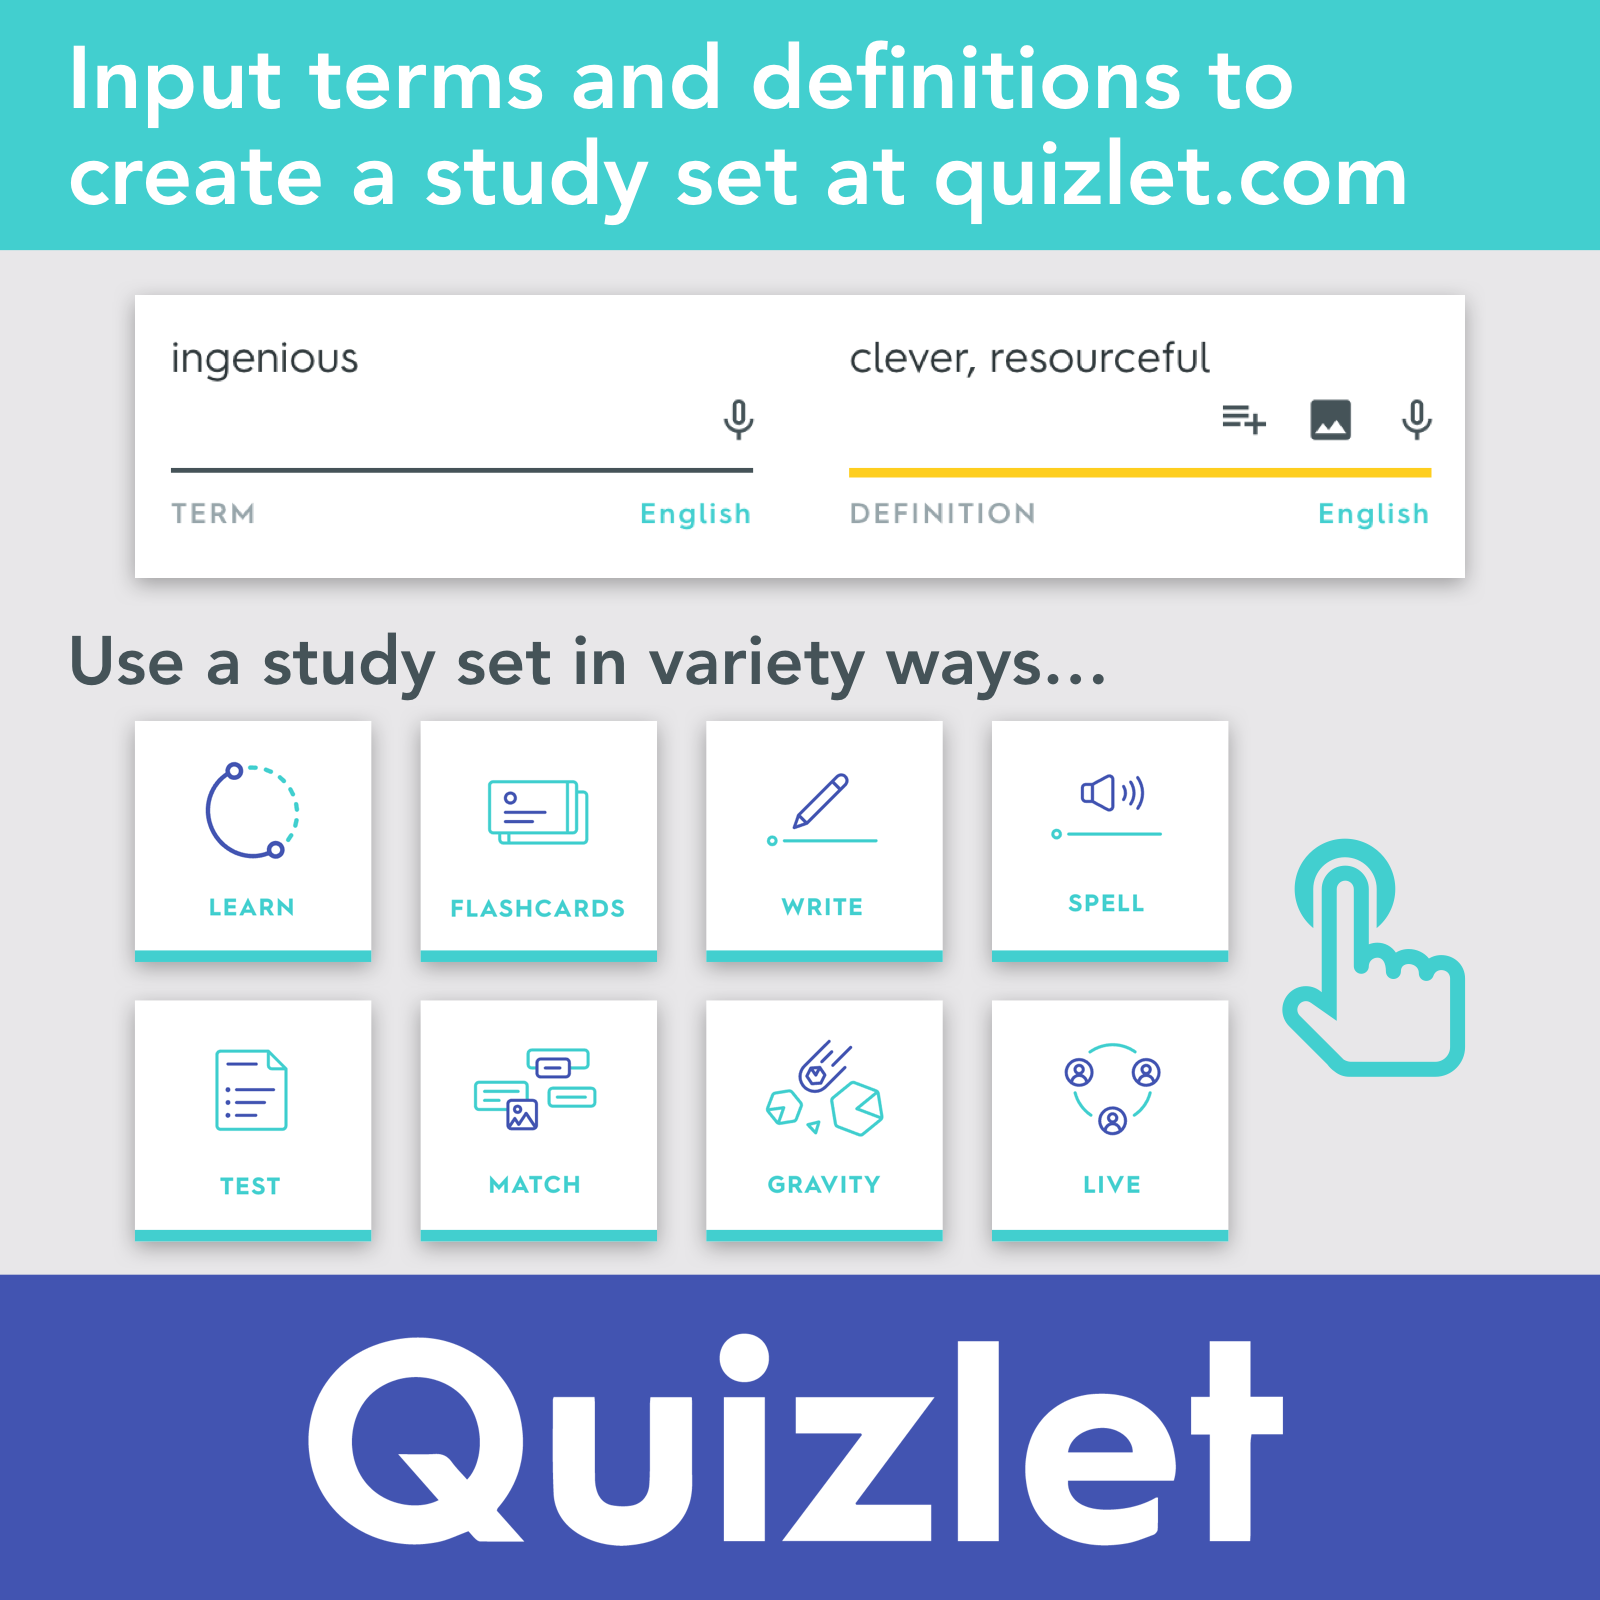 ati client rights case study quizlet